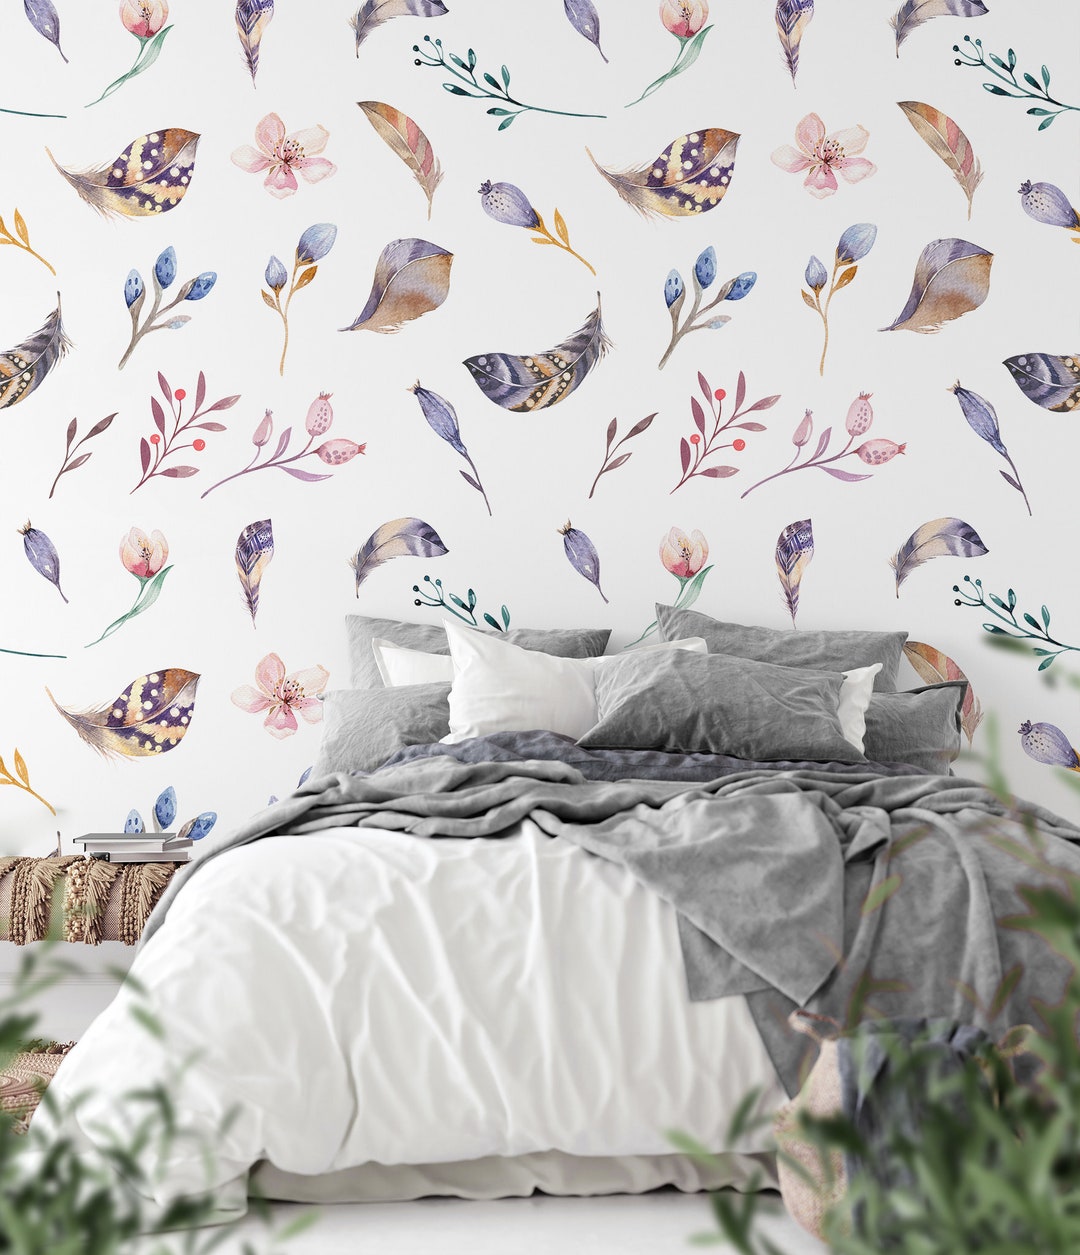 Feathers and Wildflowers Wallpaper Self Adhesive Wallpaper - Etsy